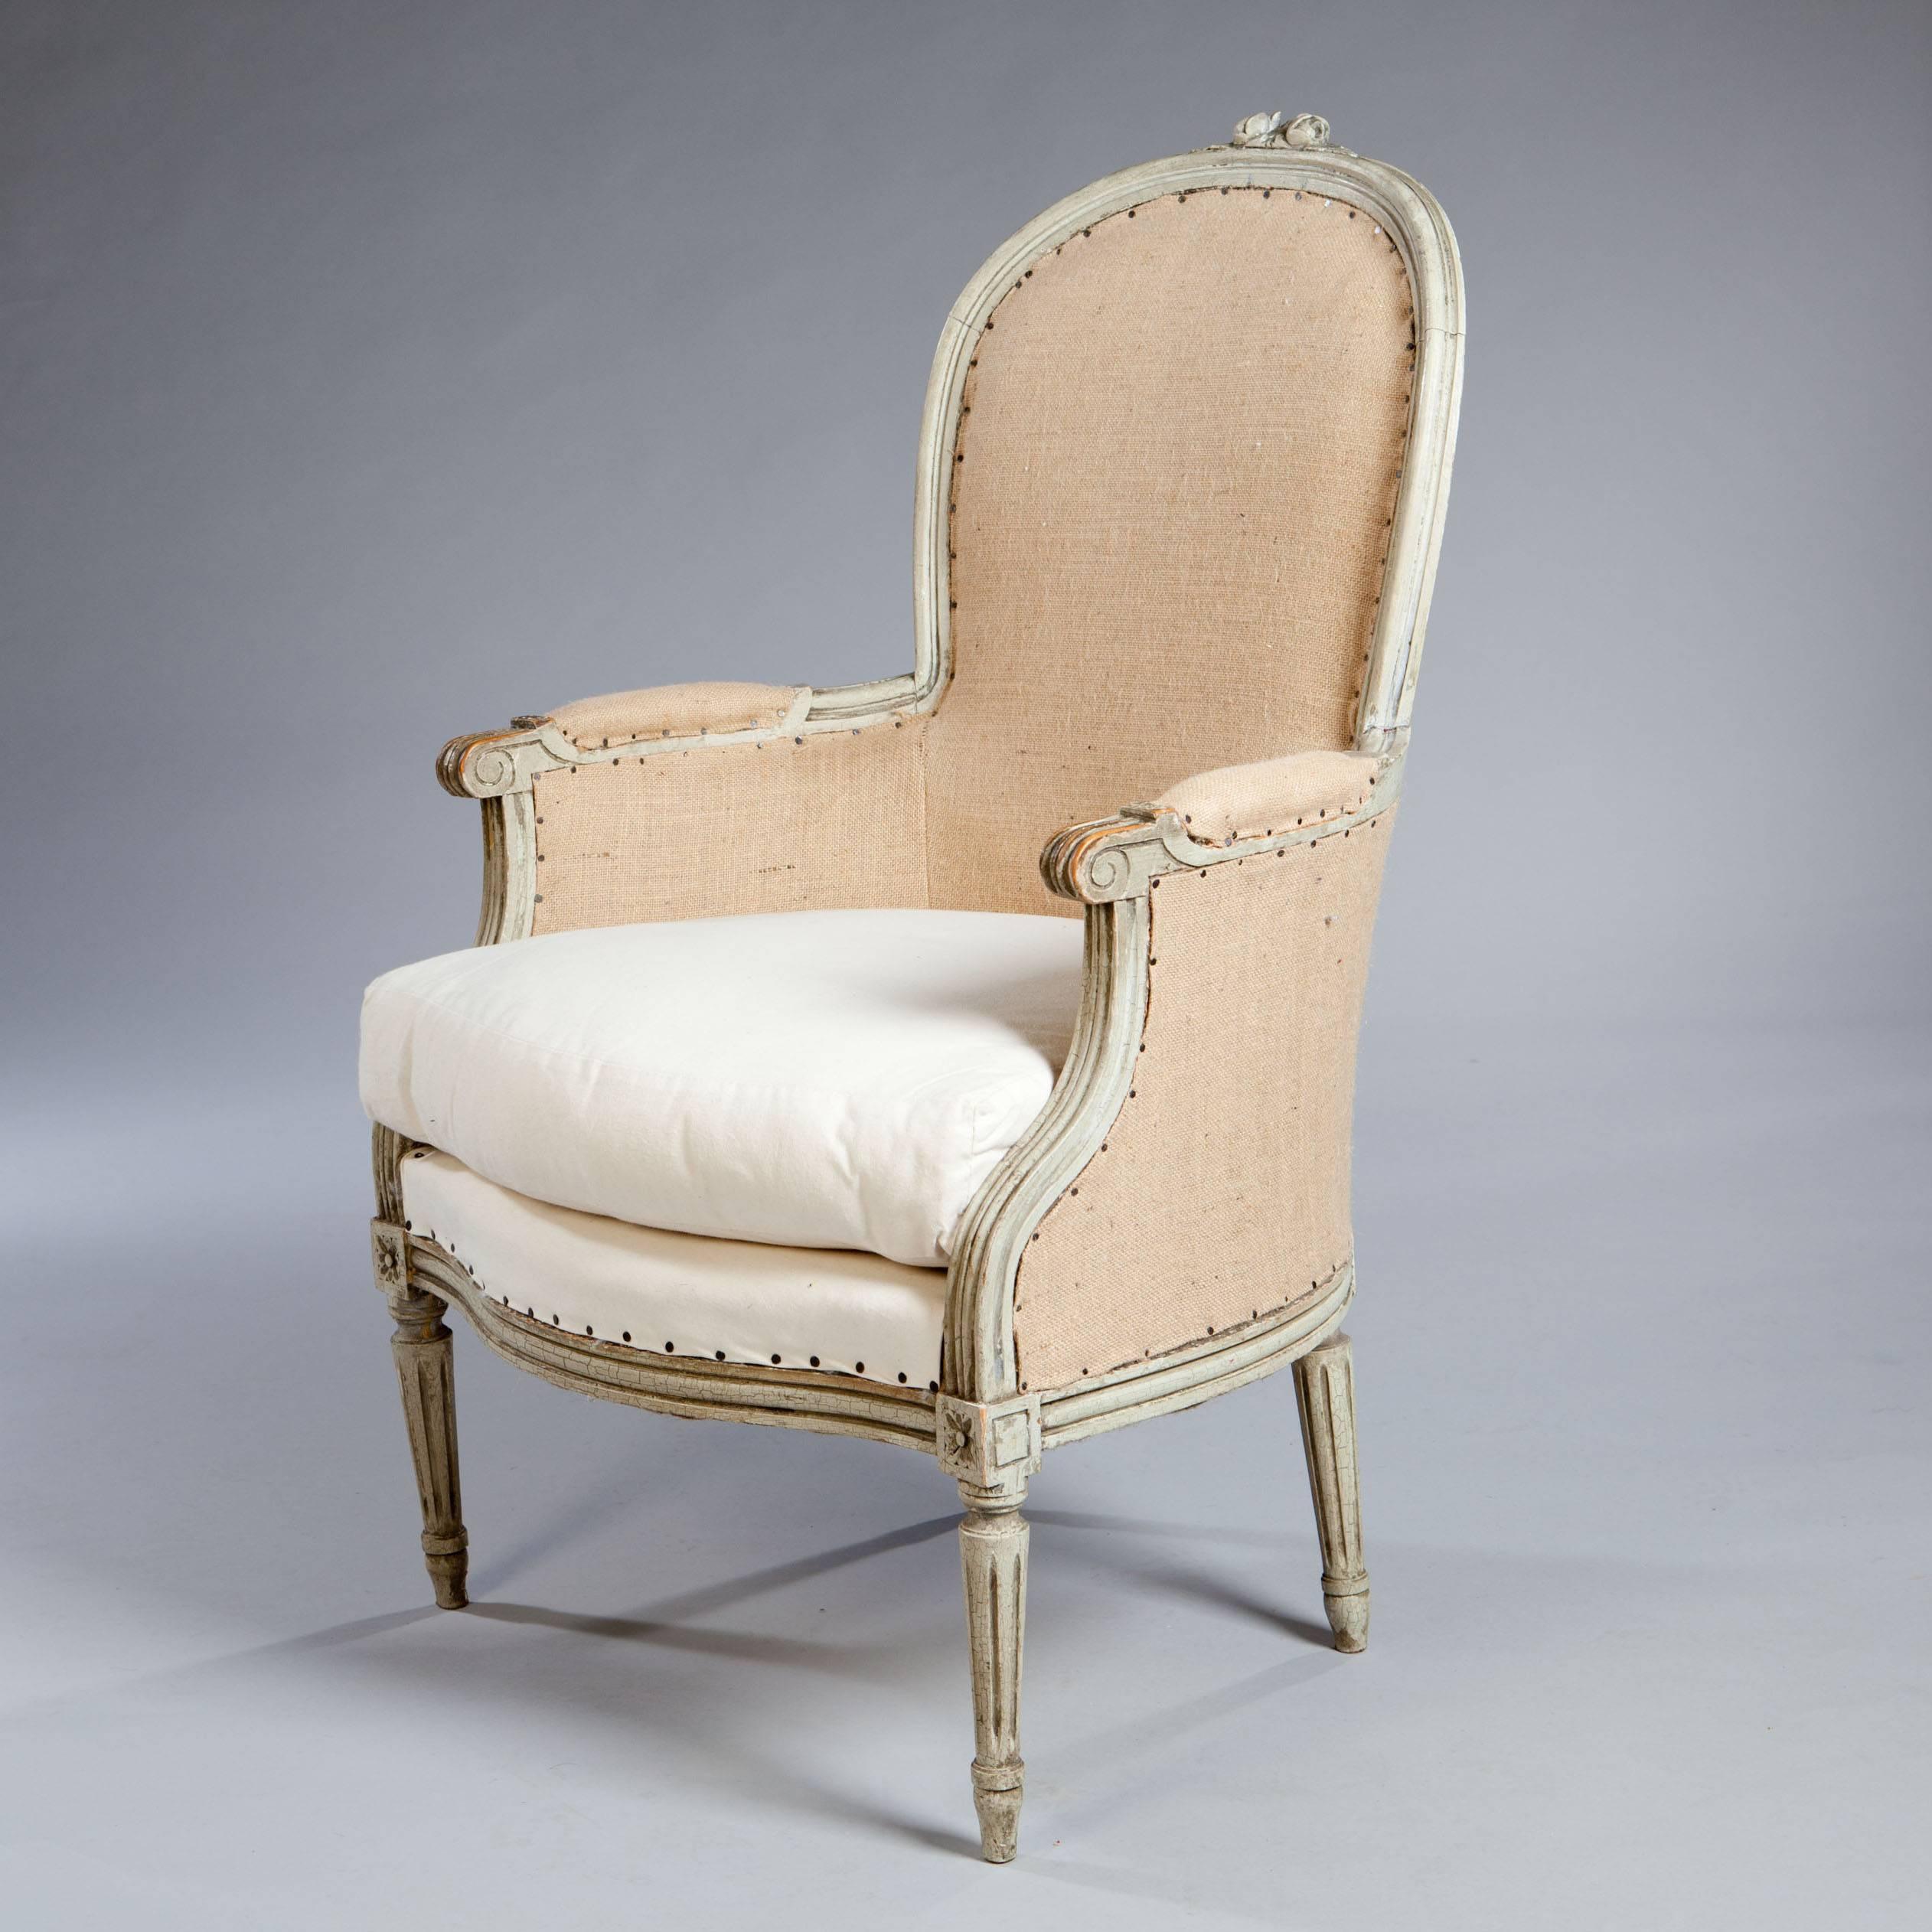 Carved A Fine Pair of French Neoclassical Bergere Armchairs